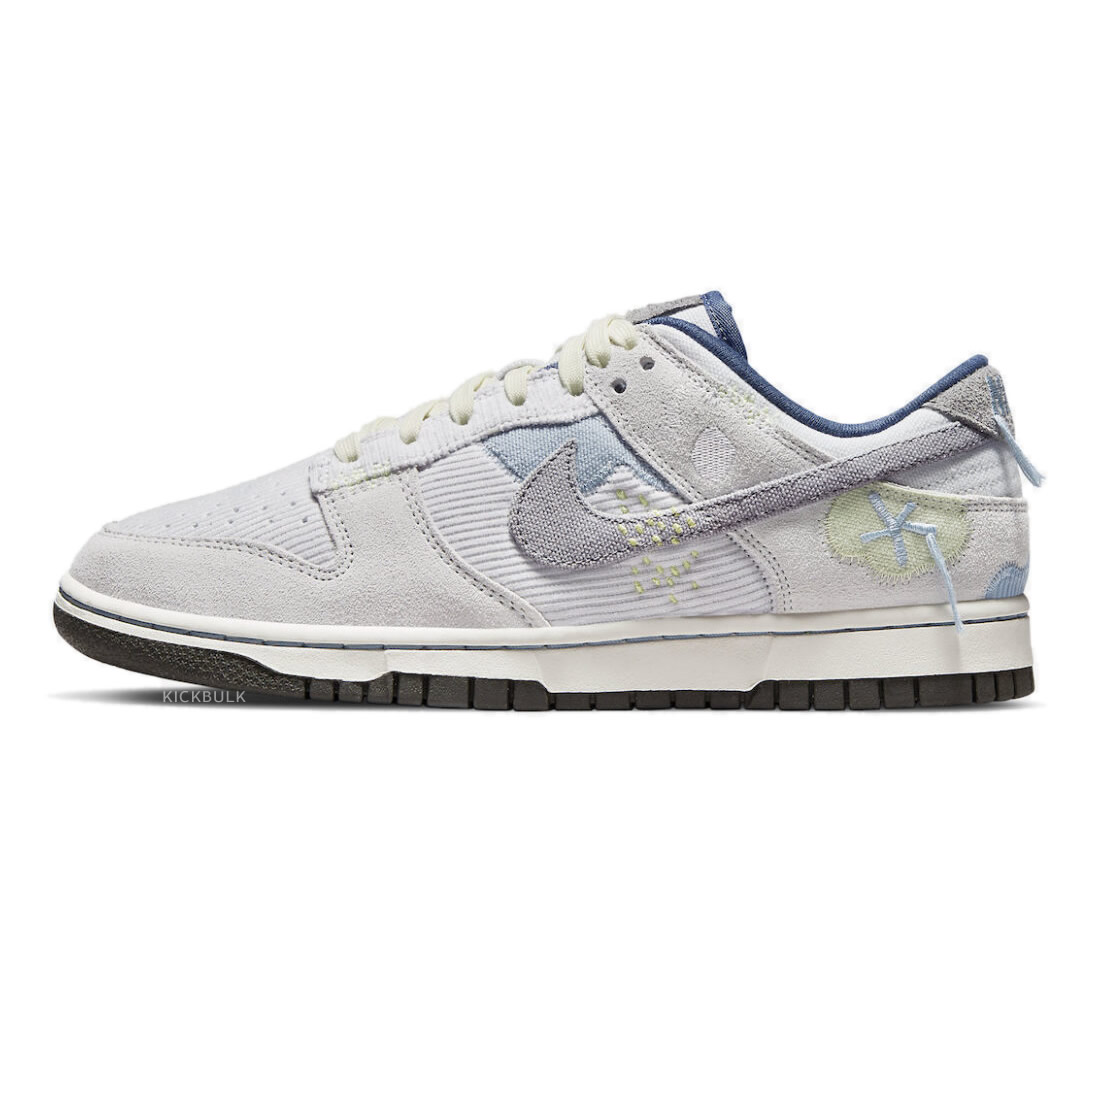 Nike Dunk Low On The Bright Side Photon Dust Wmns Dq5076 001 1 - kickbulk.org